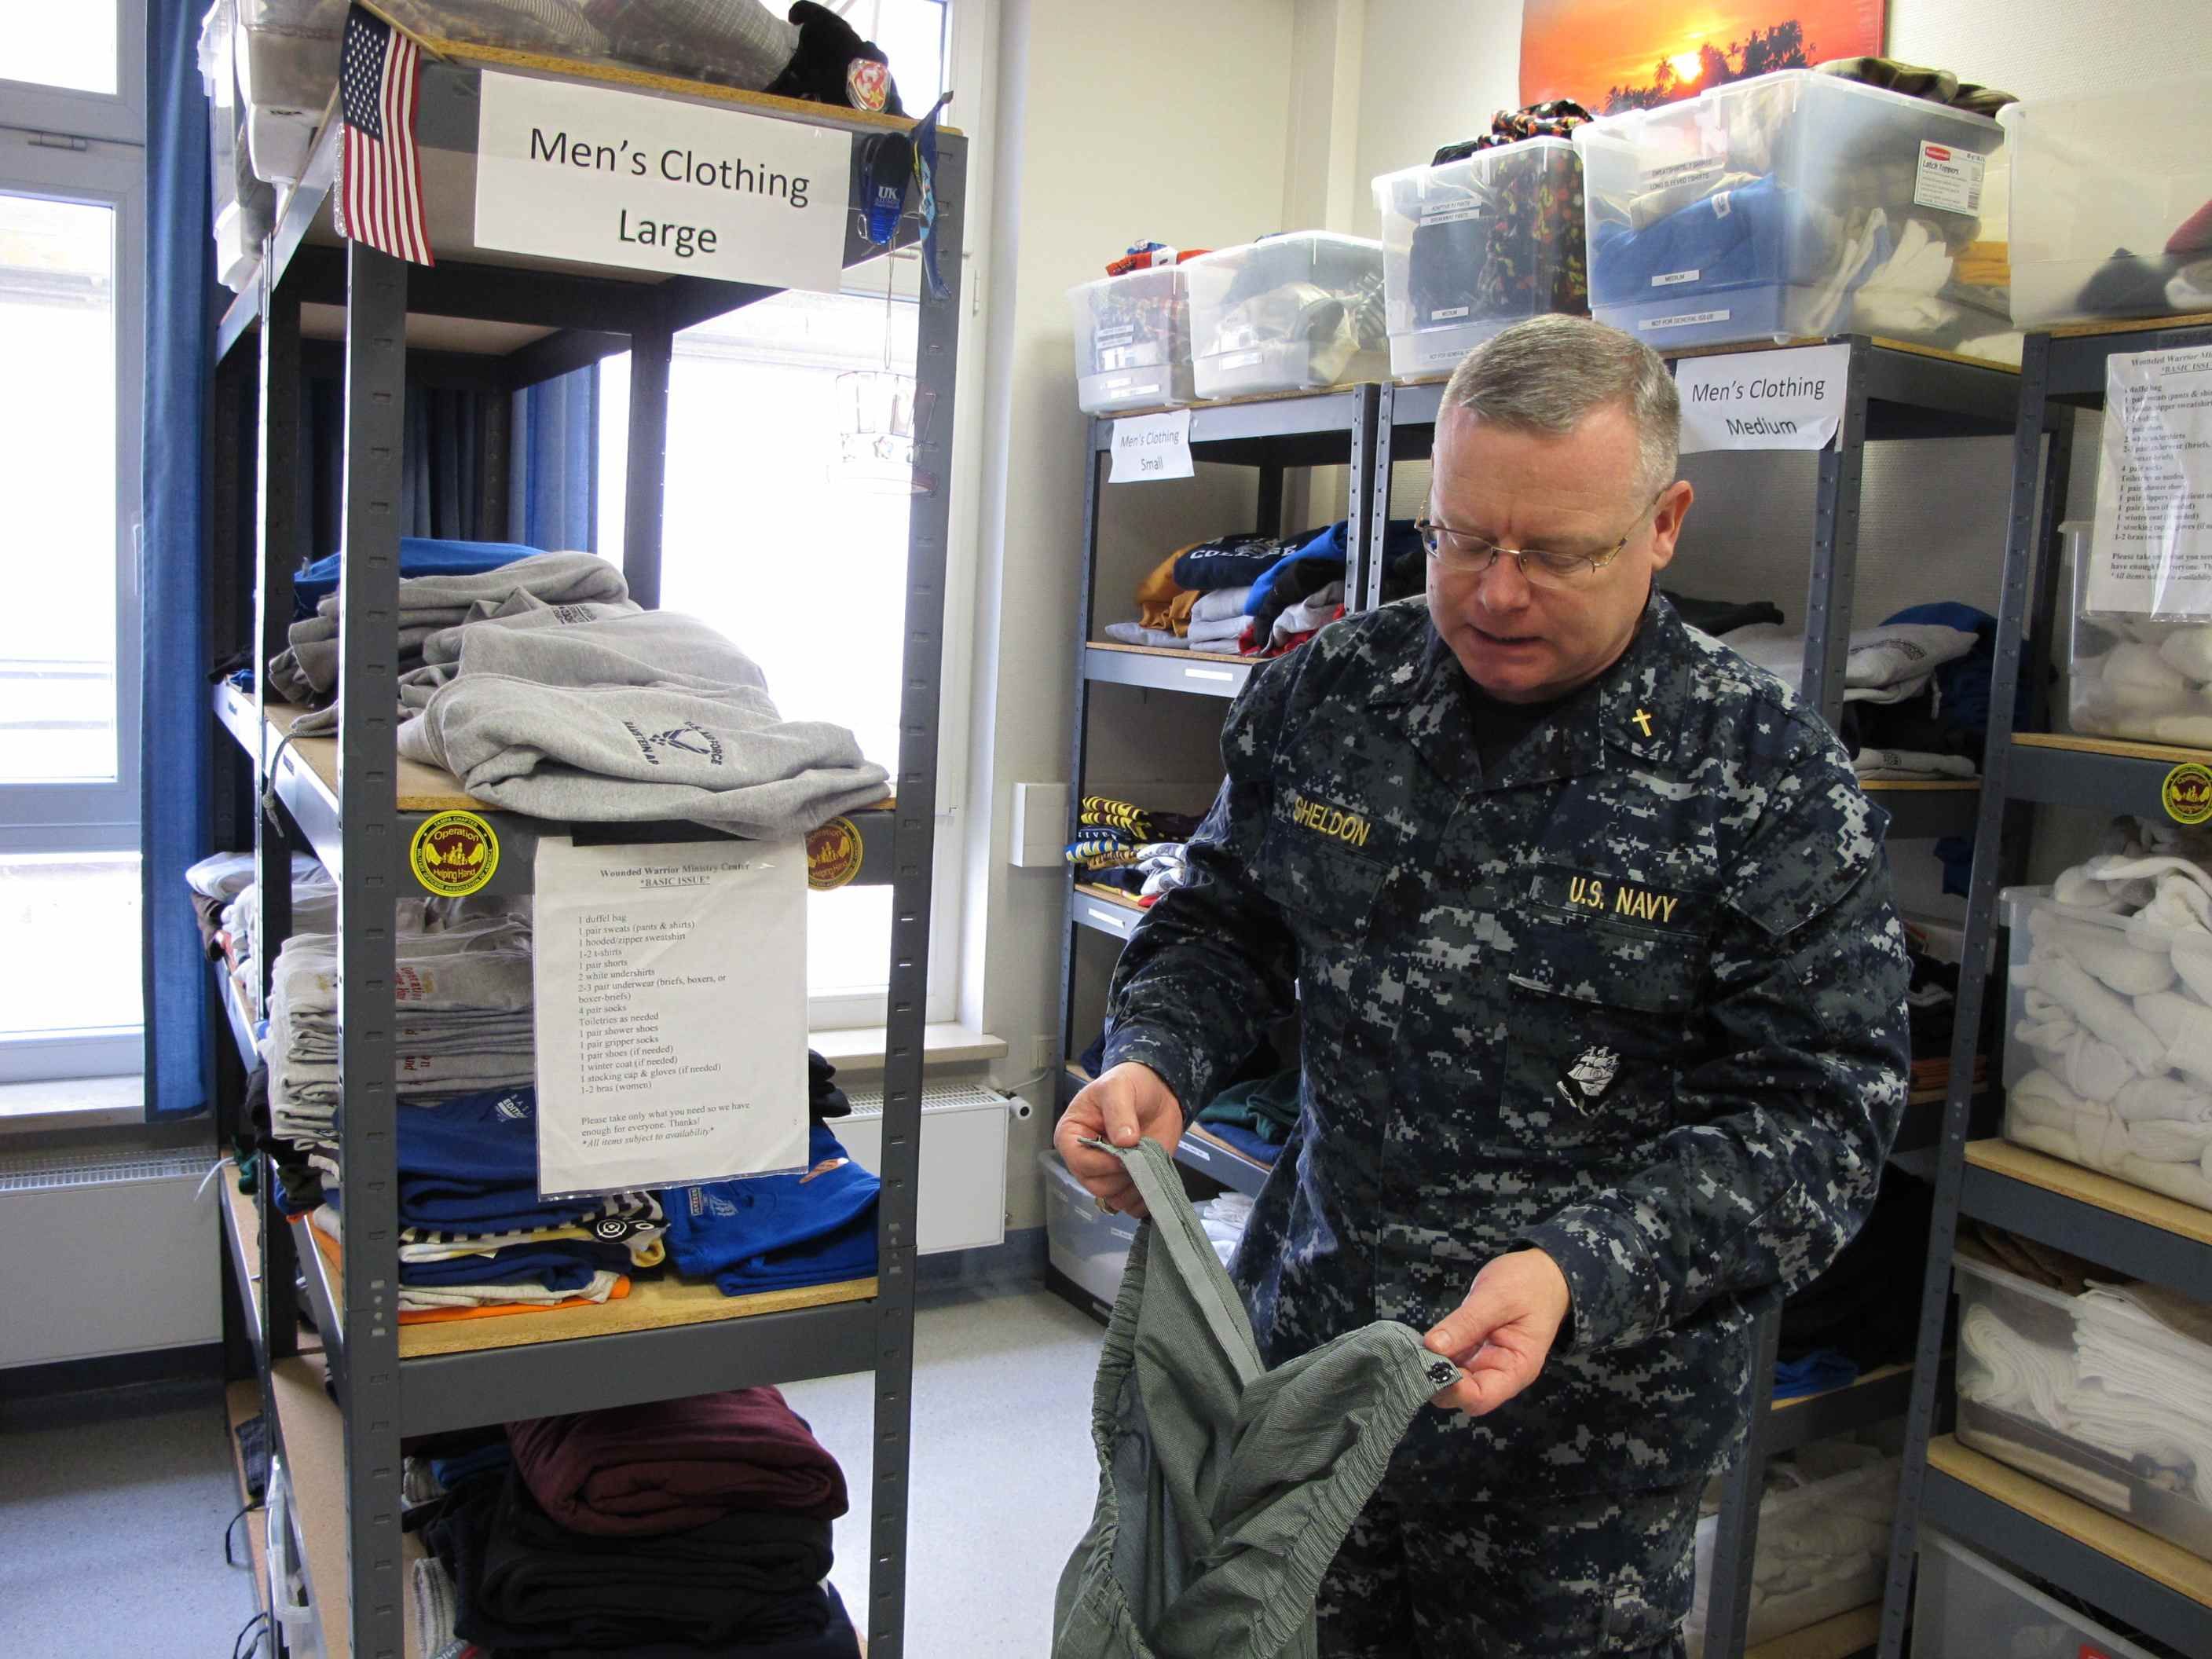 Cmdr. Joseph Sheldon, a Navy chaplain, examines a pair of pants that have been taken apart and installed with Velcro so a wounded soldier can dress themselves. Image by Meg Jones. Germany, 2011.